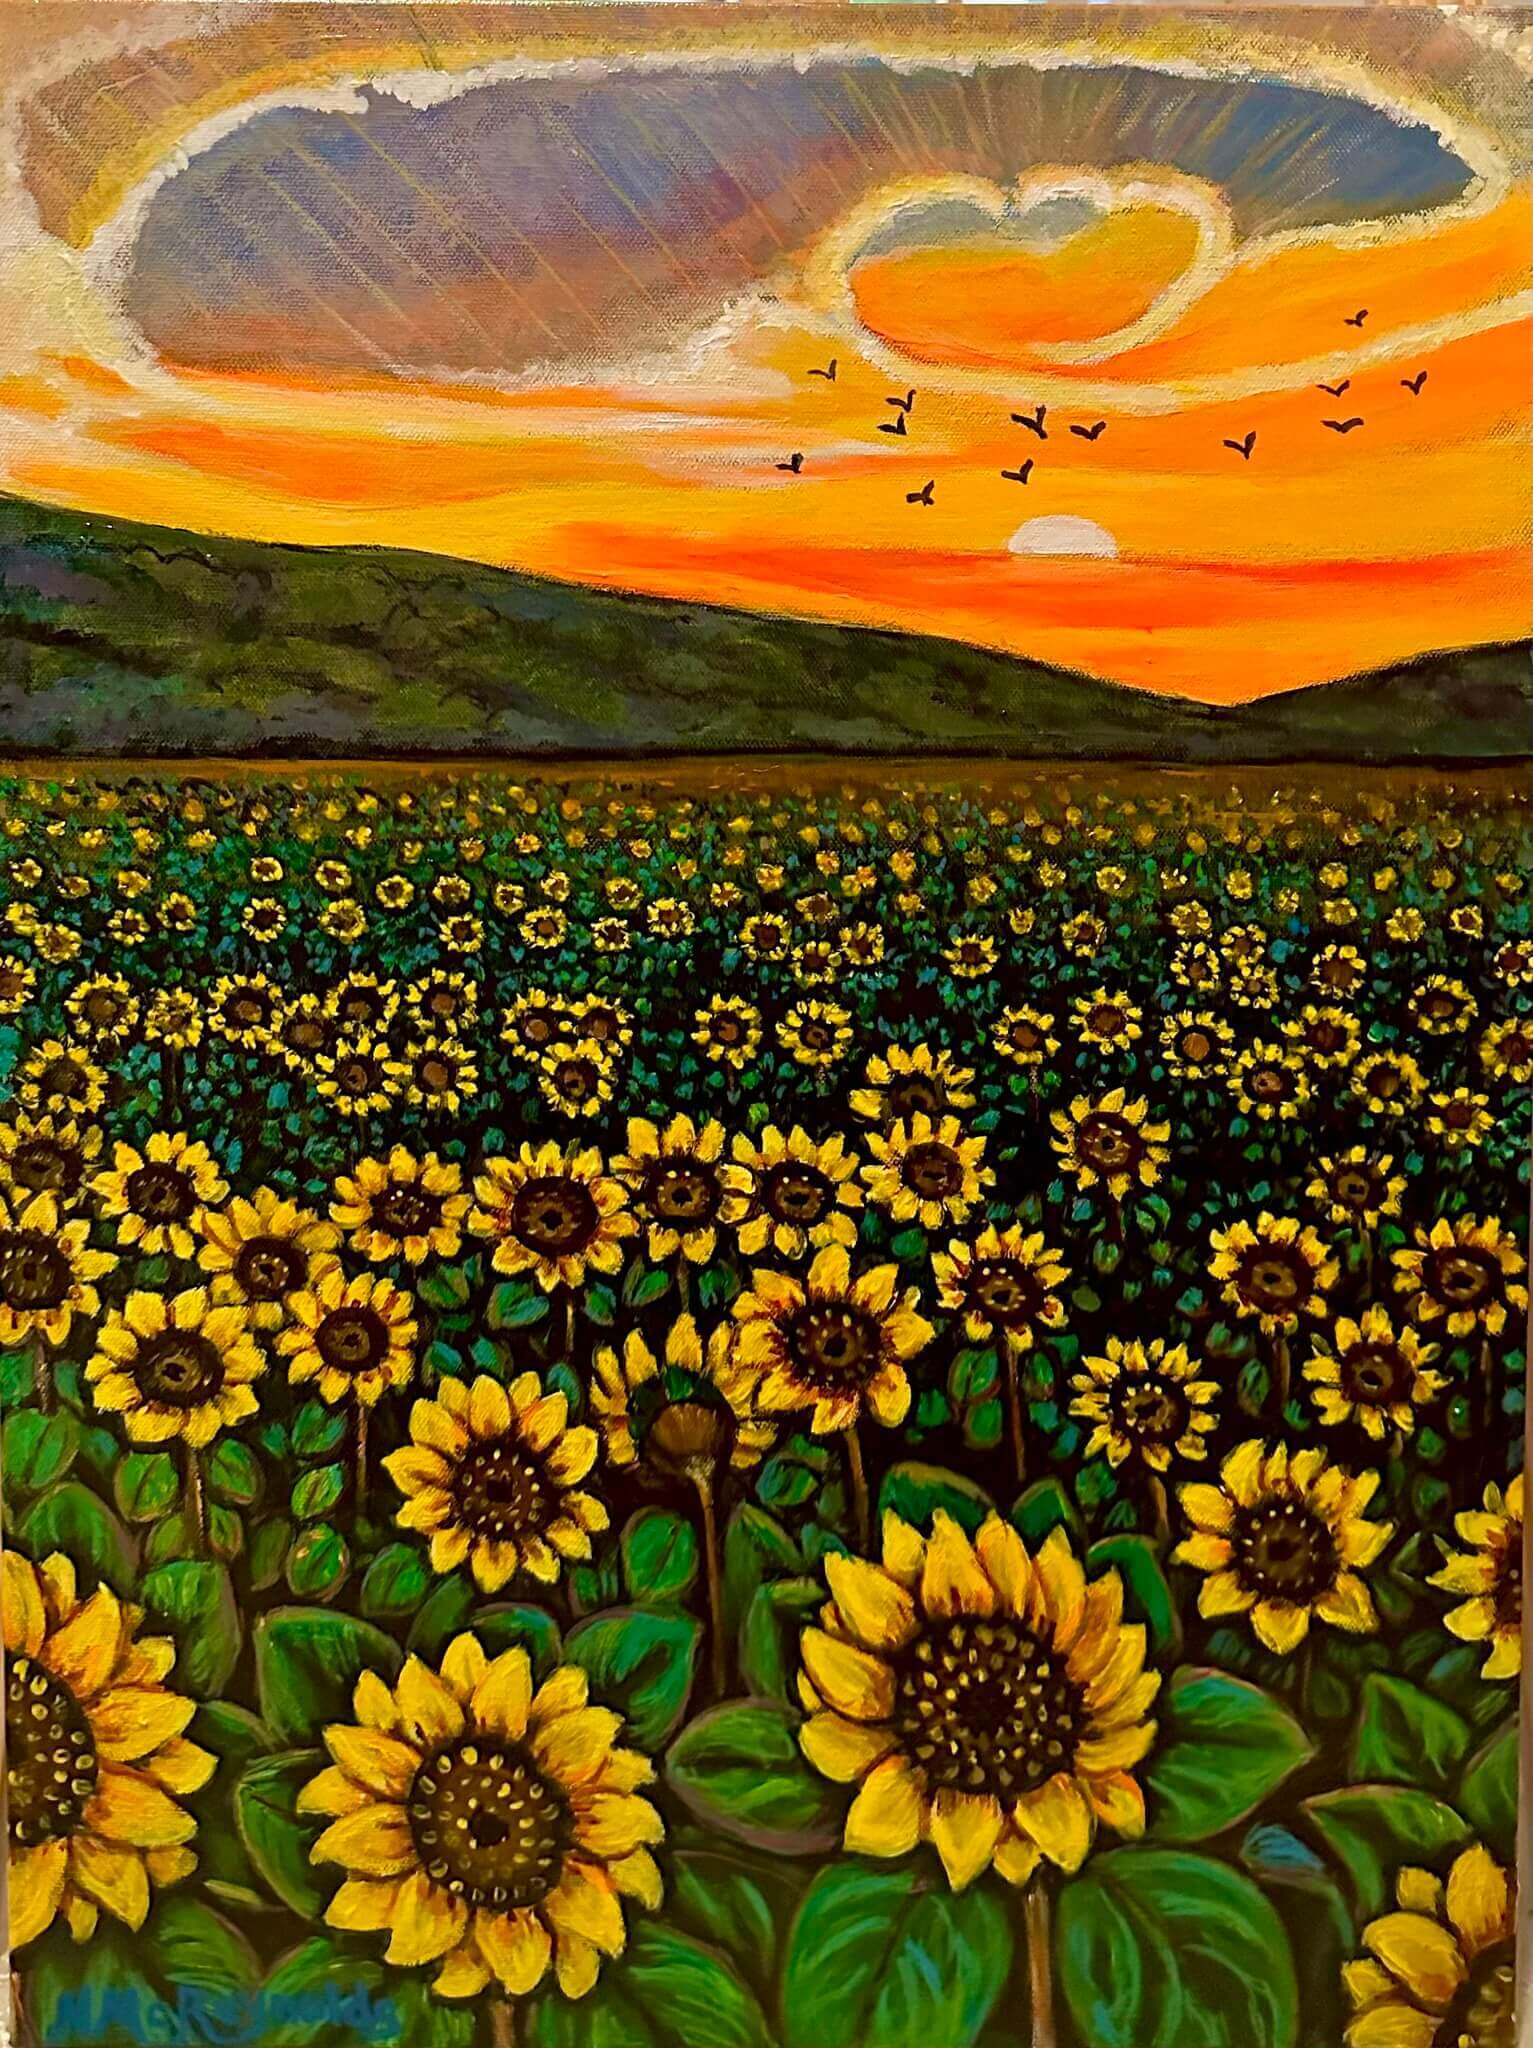 A meadow of sunflowers painted by a sunrise